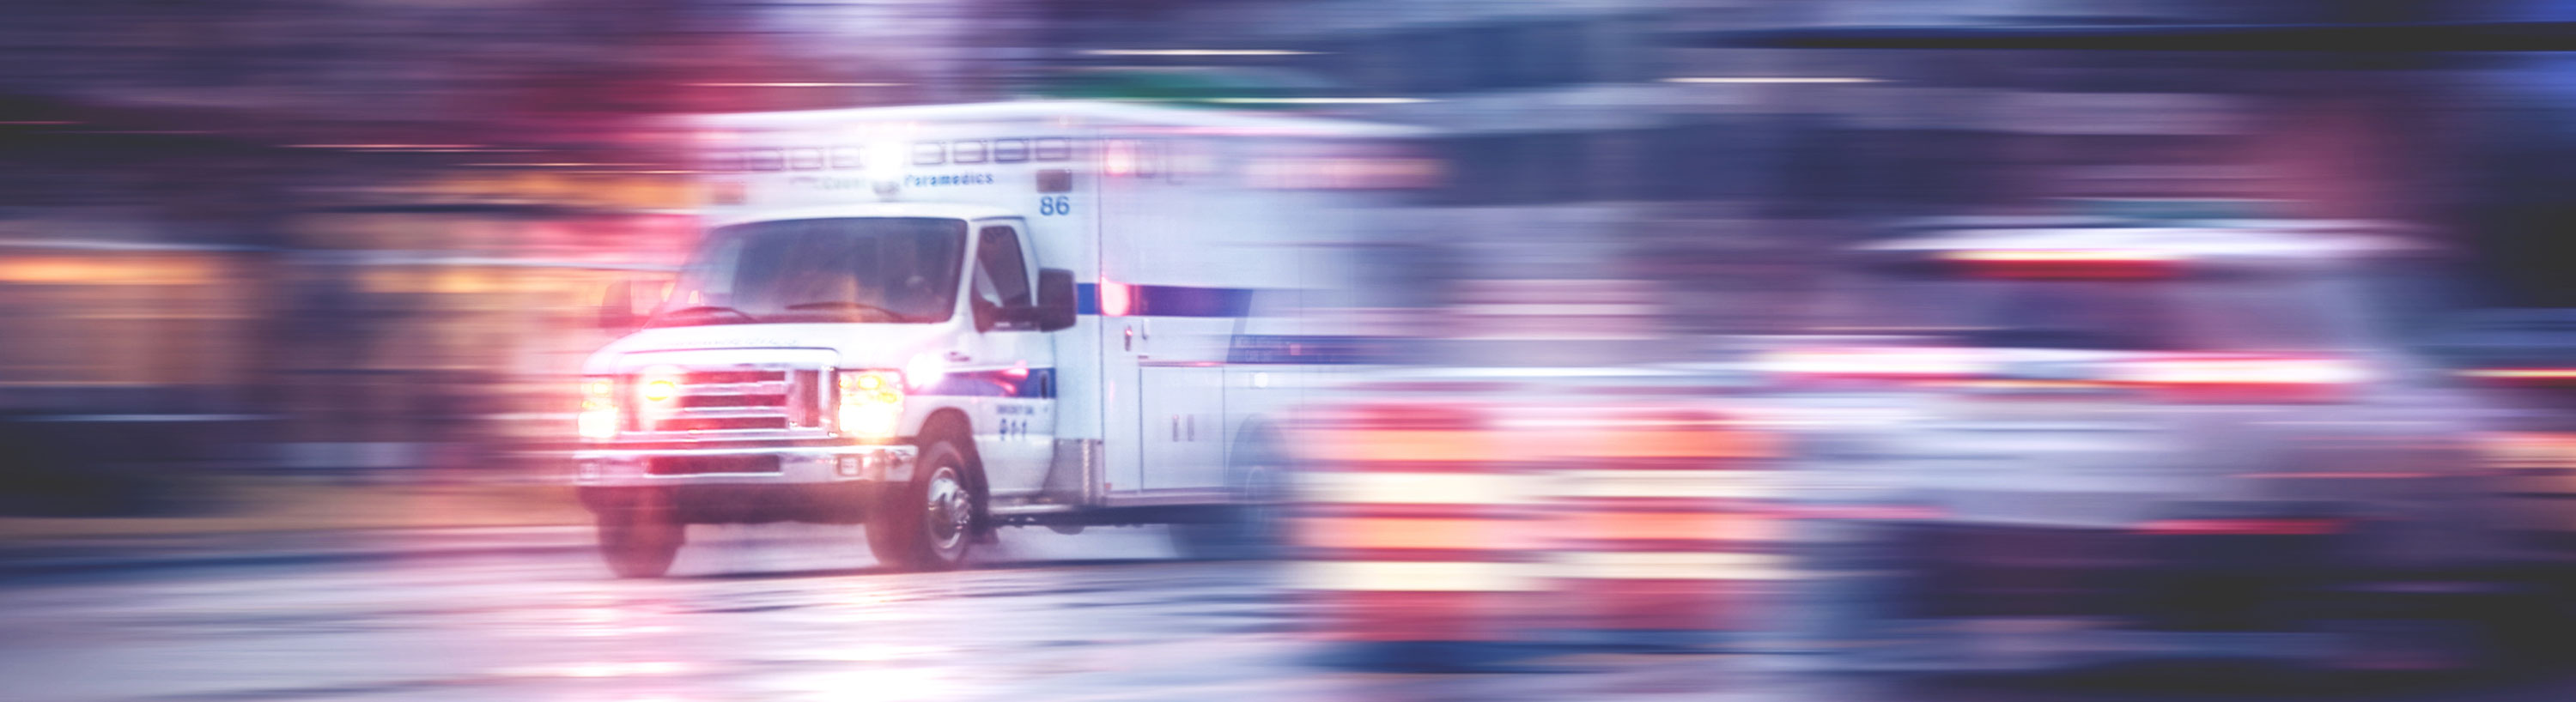 Banner picture of an ambulance in motion on the road with their lights on.